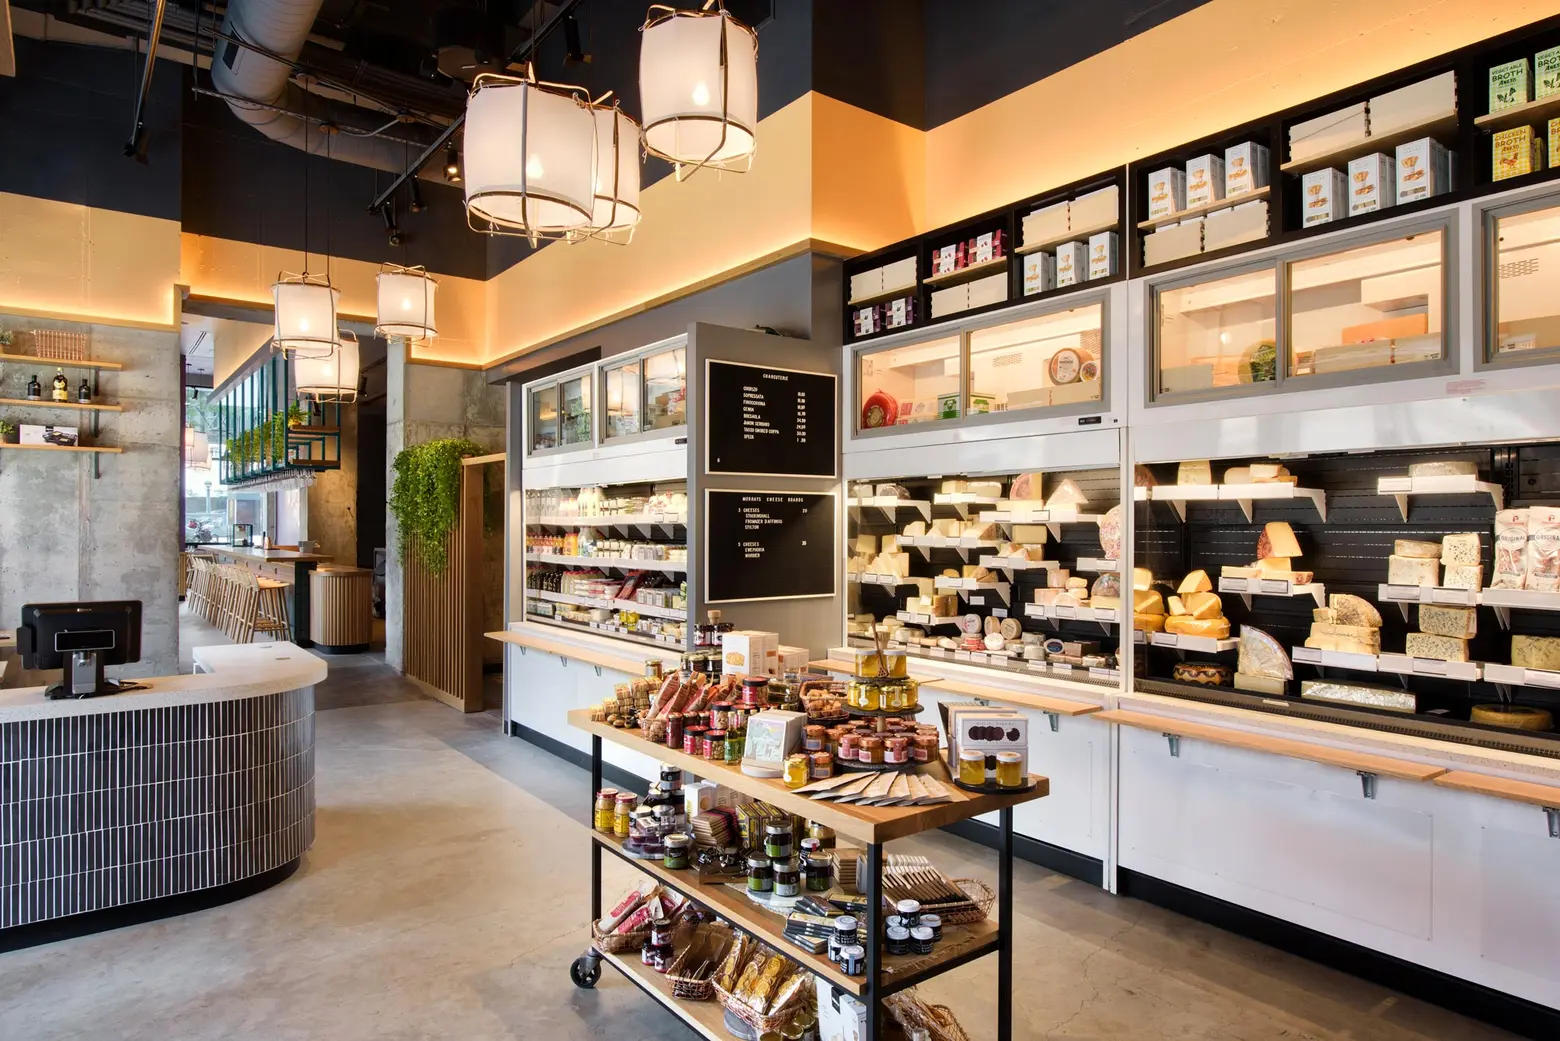 Murray’s Cheese opens a new flagship in Long Island City